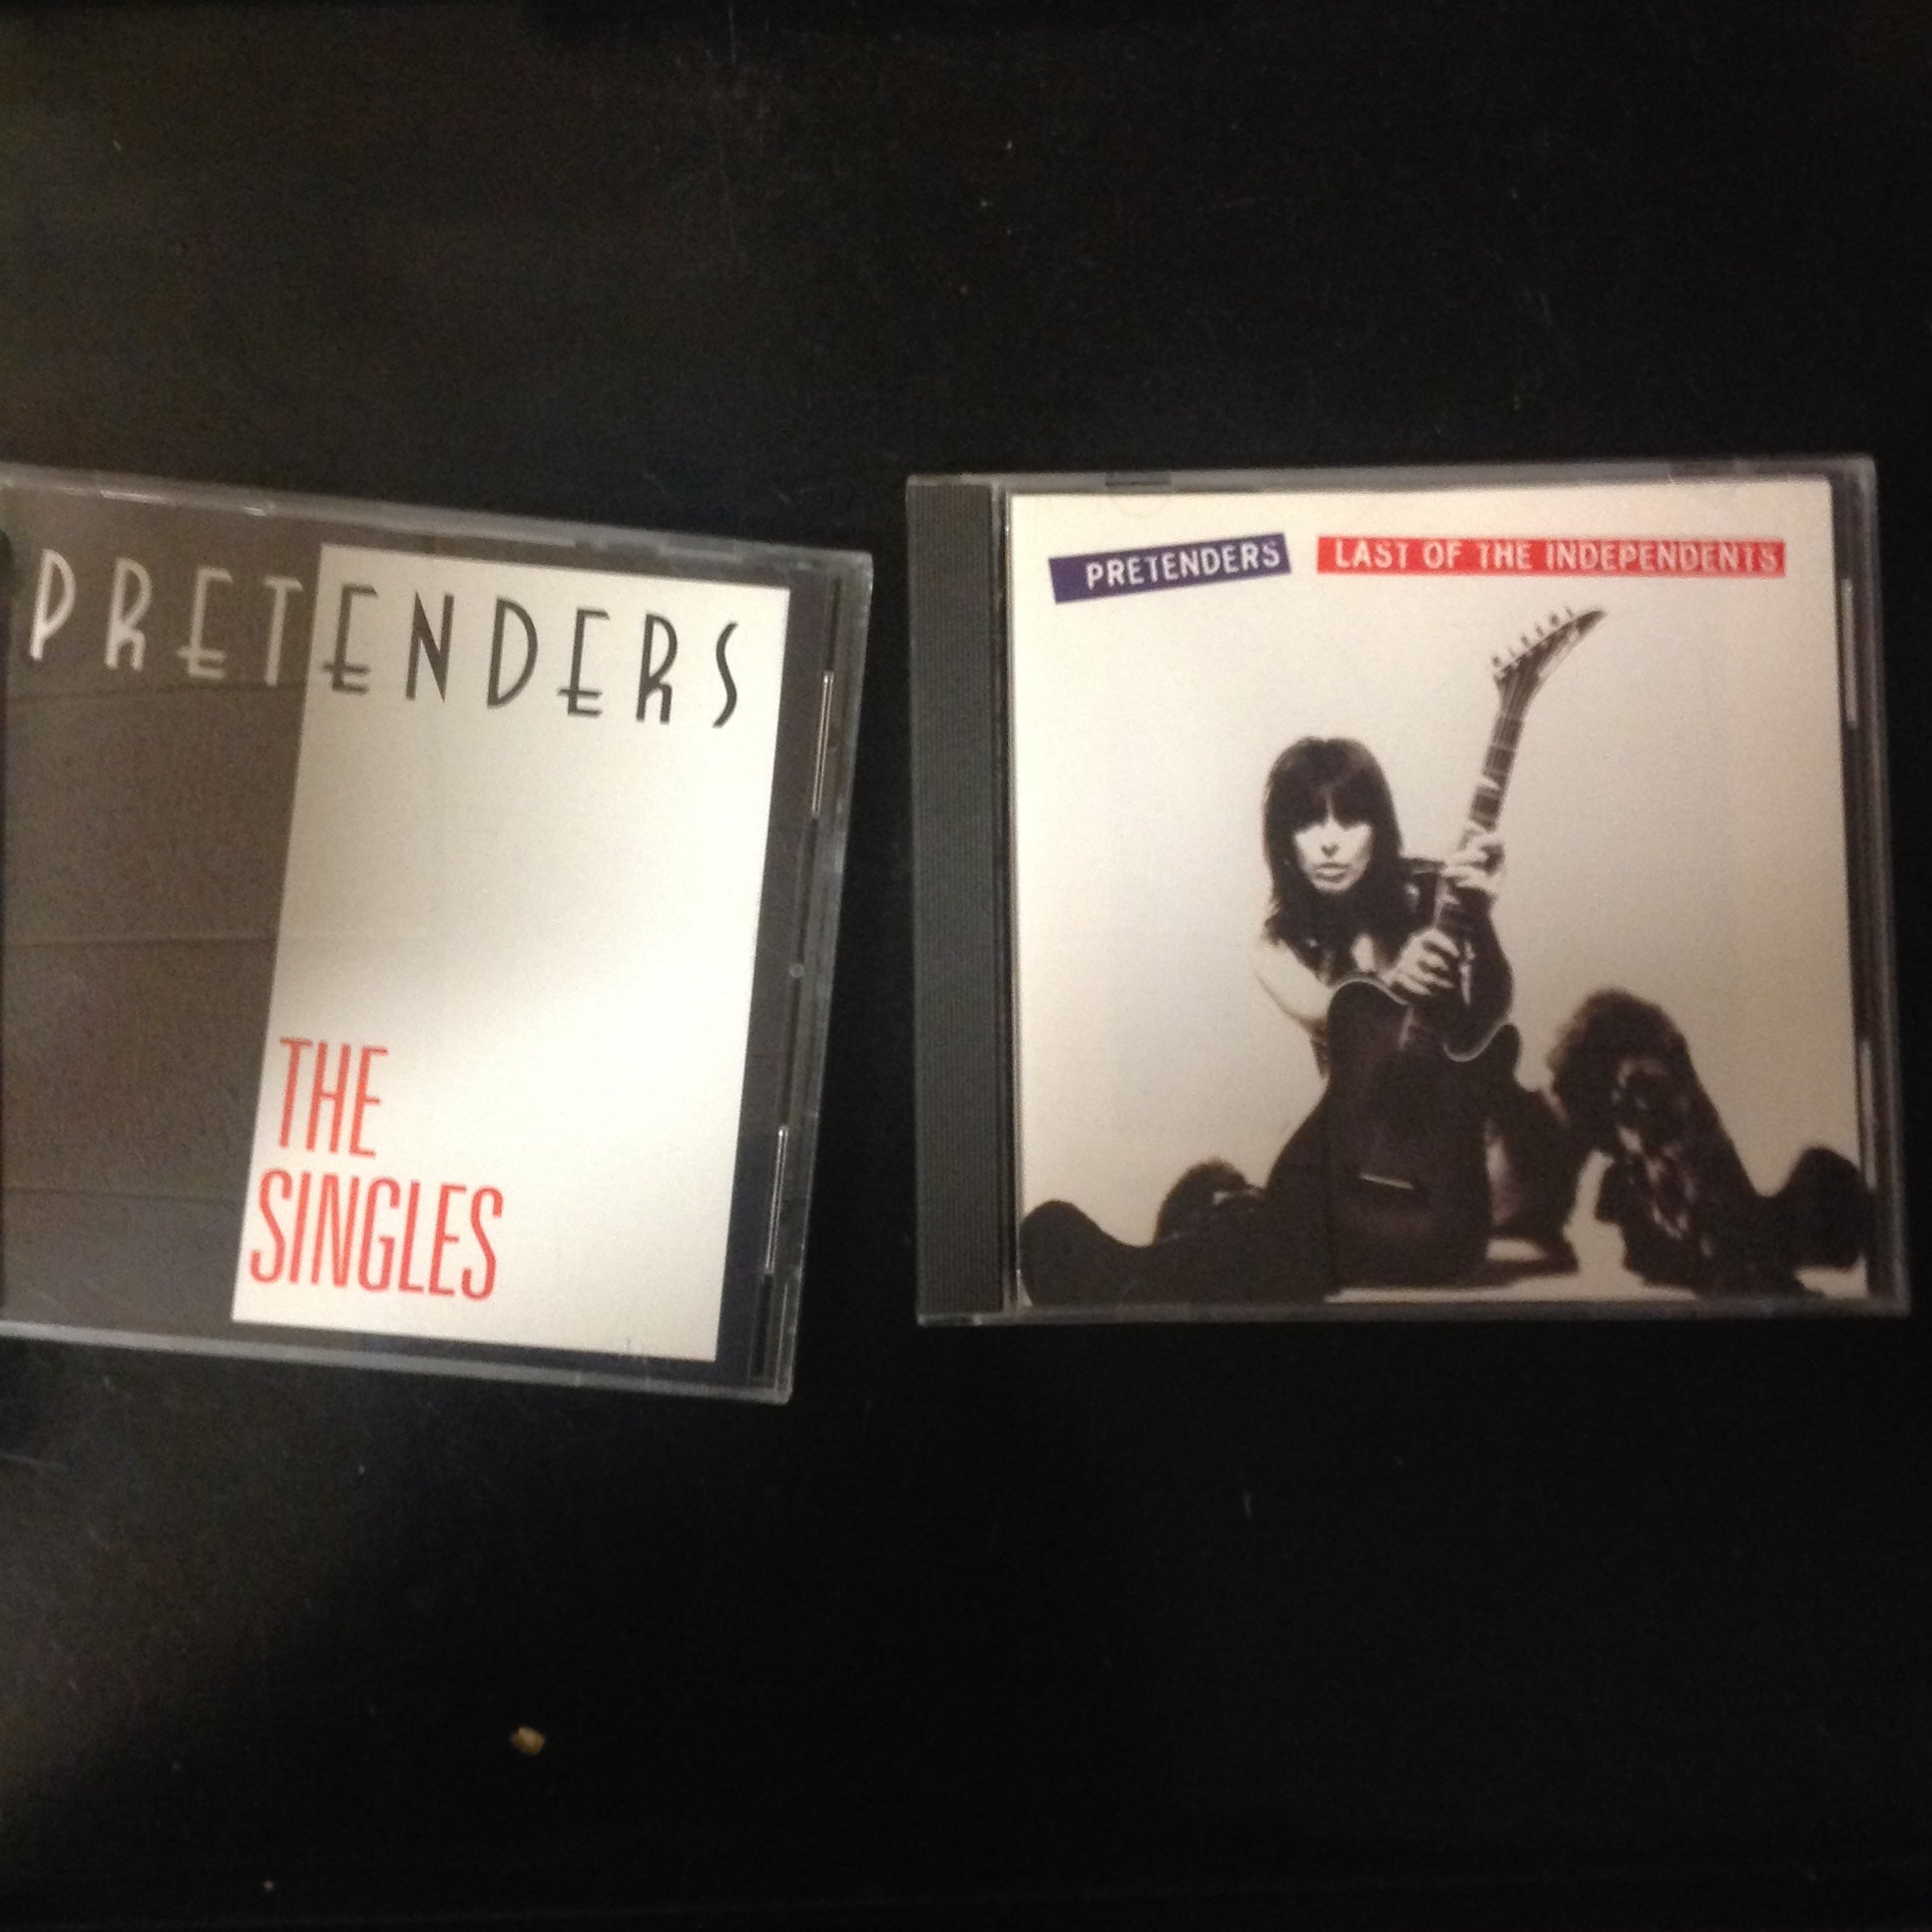 PAIR BARGAIN CDs Pretenders The Singles Last of the Independents 945572-2 925664-2